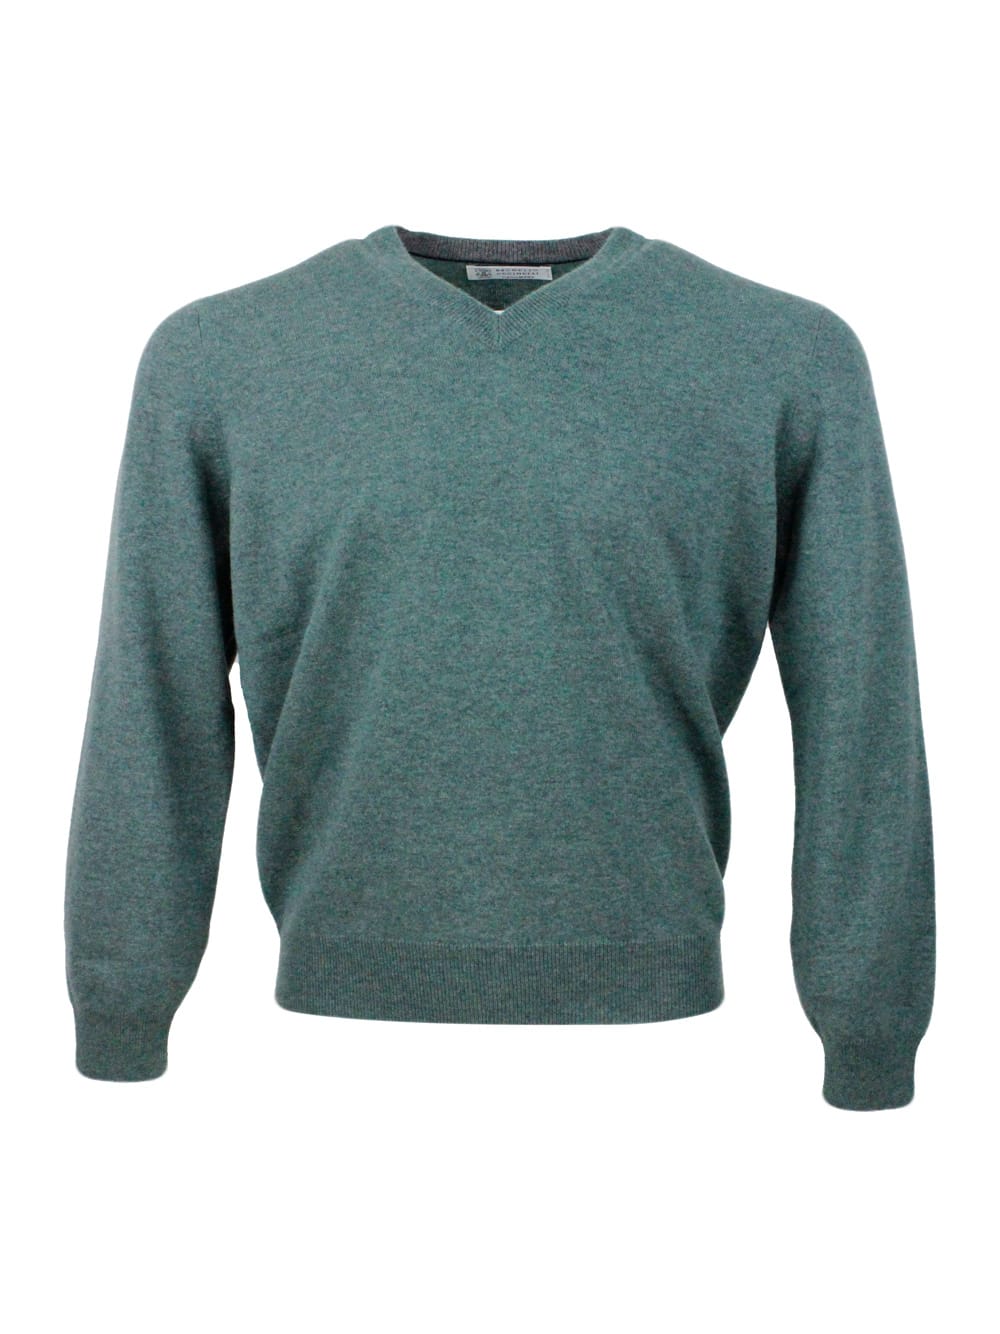 BRUNELLO CUCINELLI LONG-SLEEVED V-NECK SWEATER IN FINE 100% CASHMERE WITH CONTRASTING PIPING ON THE CUFF